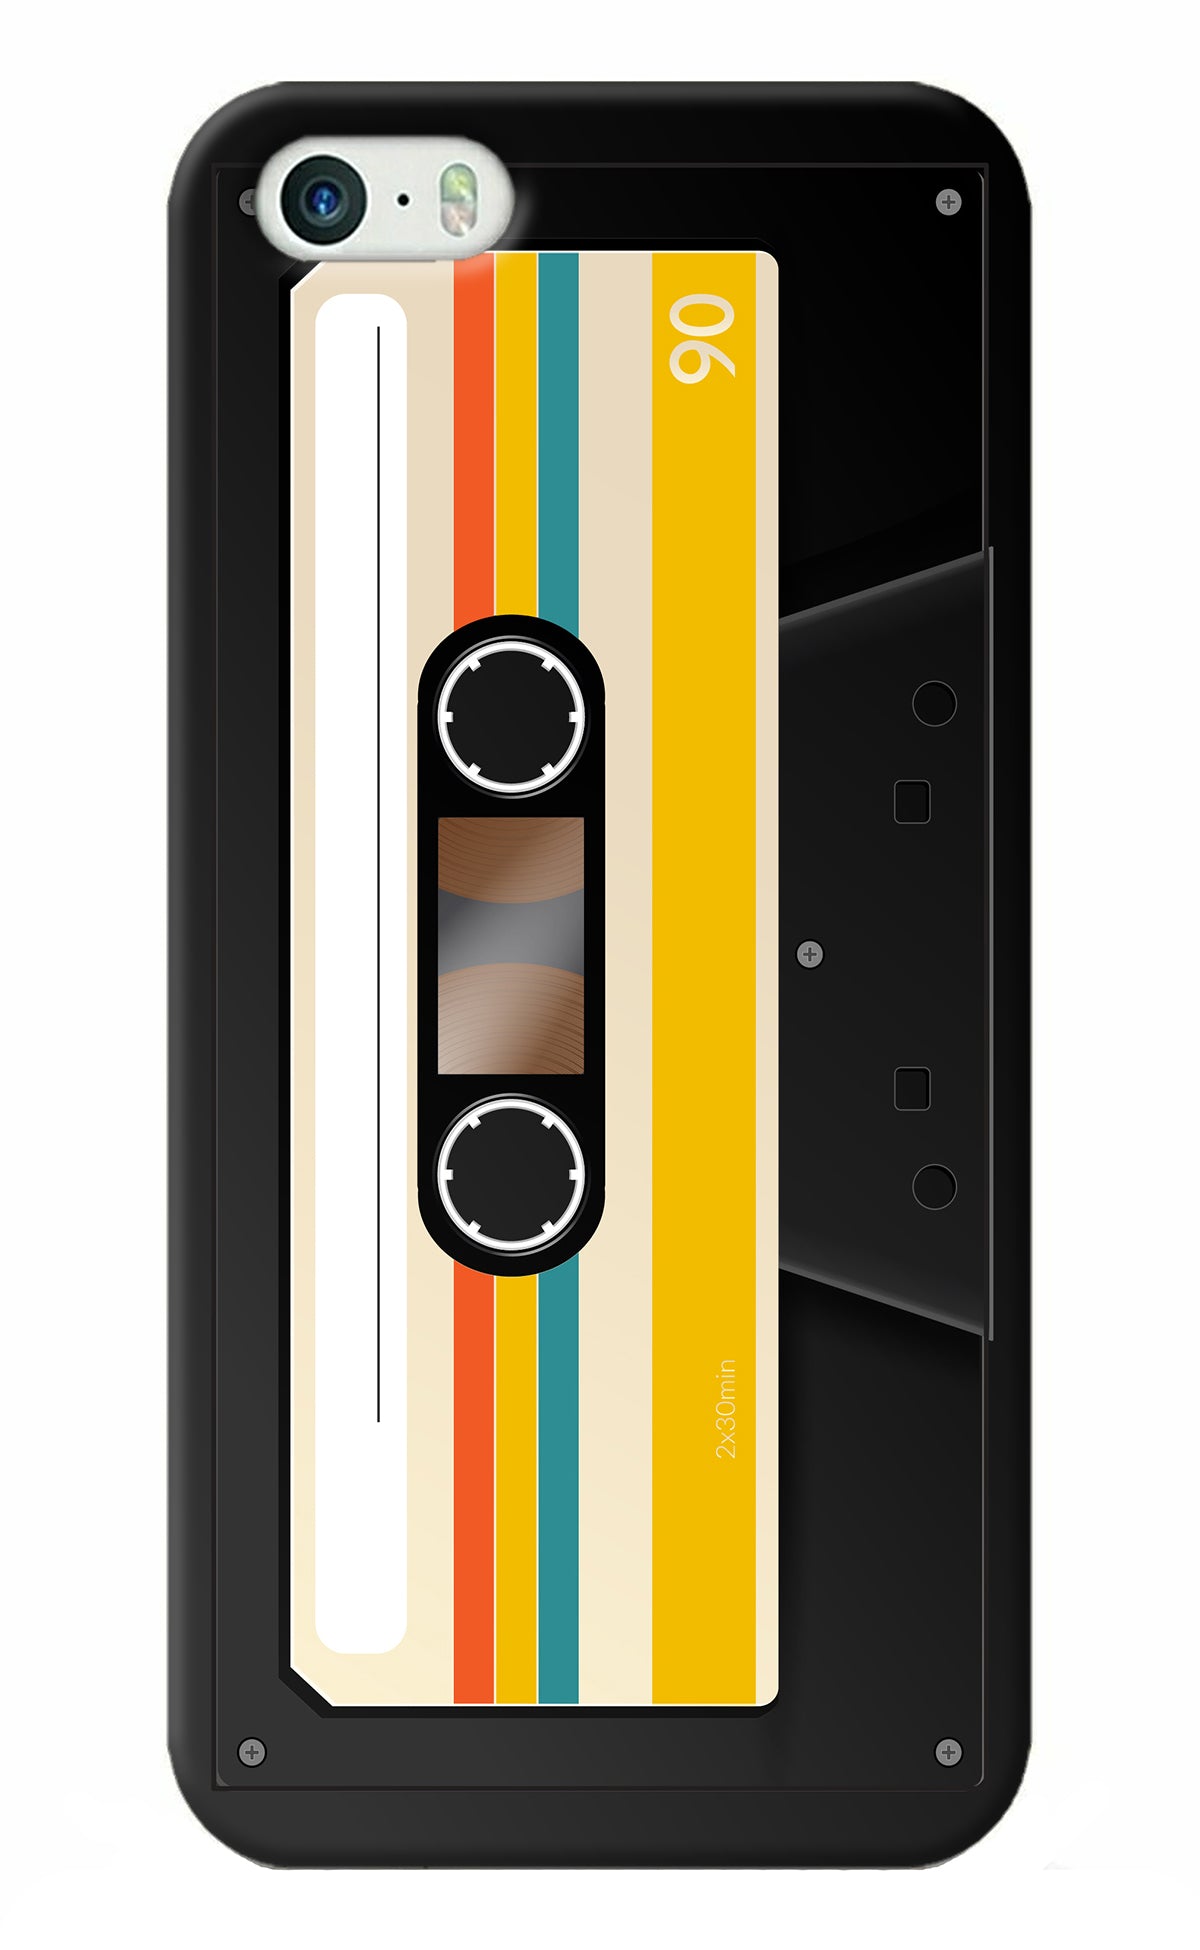 Tape Cassette iPhone 5/5s Back Cover